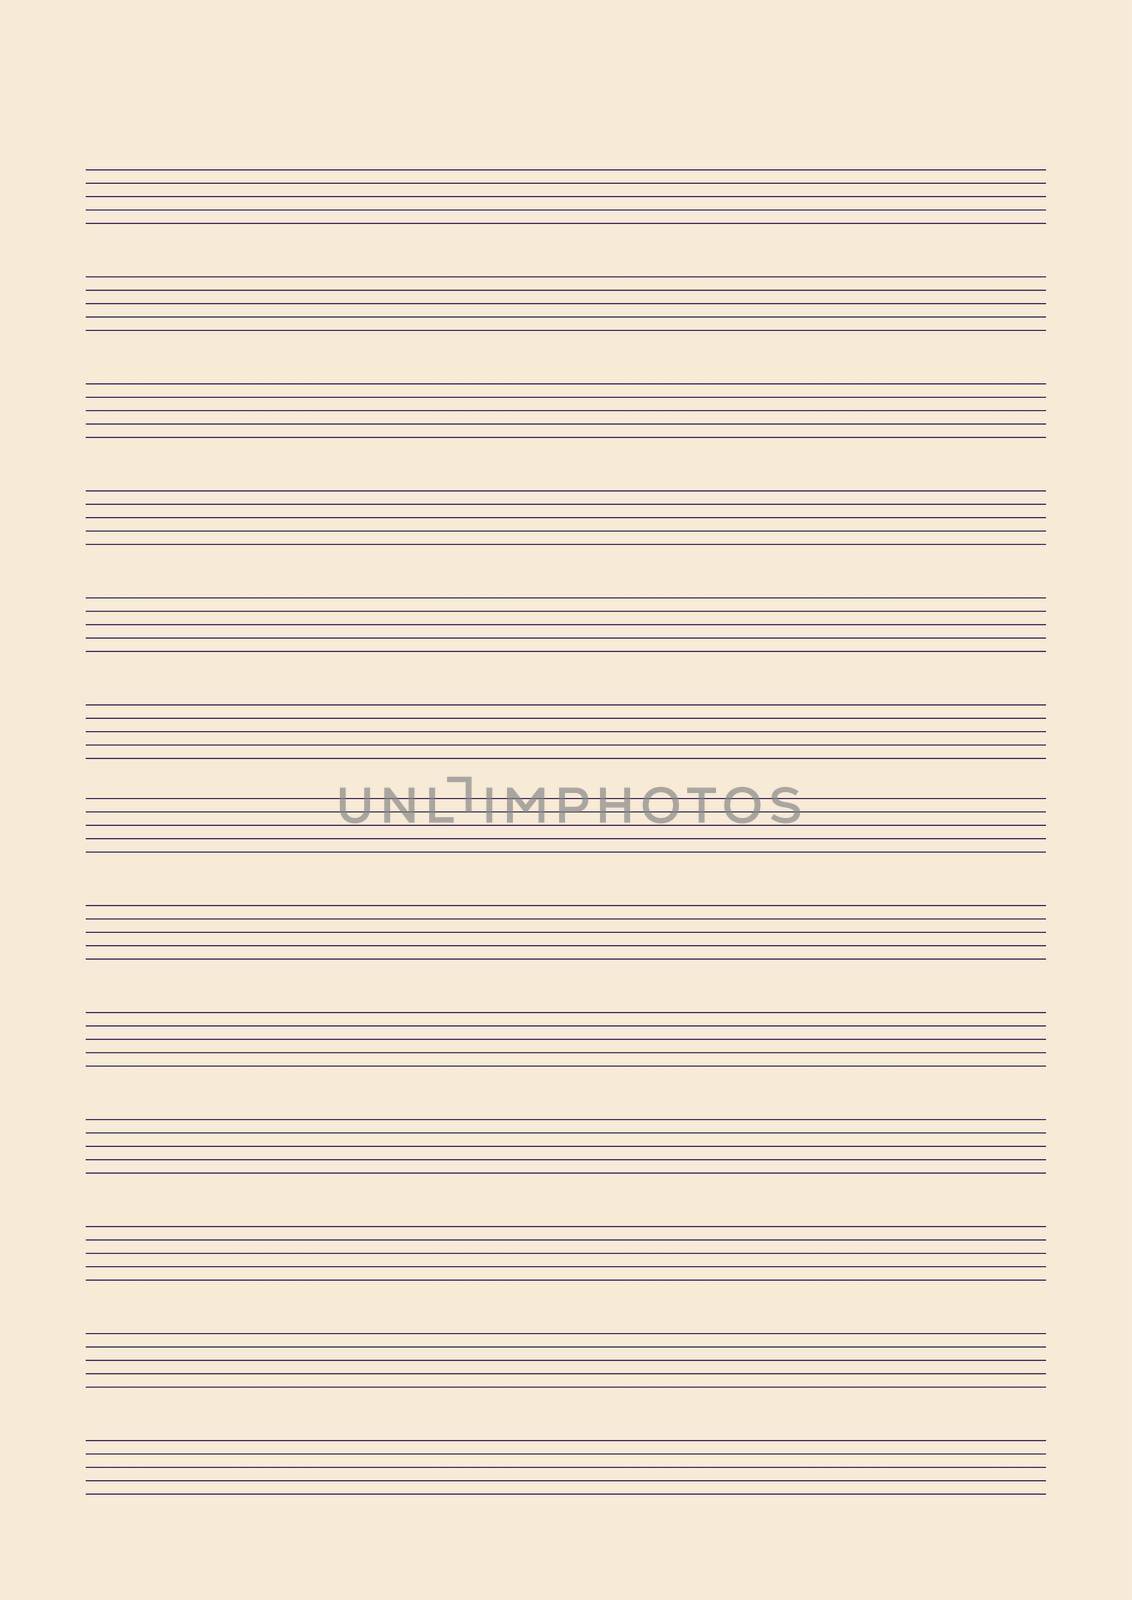 Grid paper with stave on a white background. A blank music sheet paper with staff. Geometric pattern for composition, education, school. A4 size.